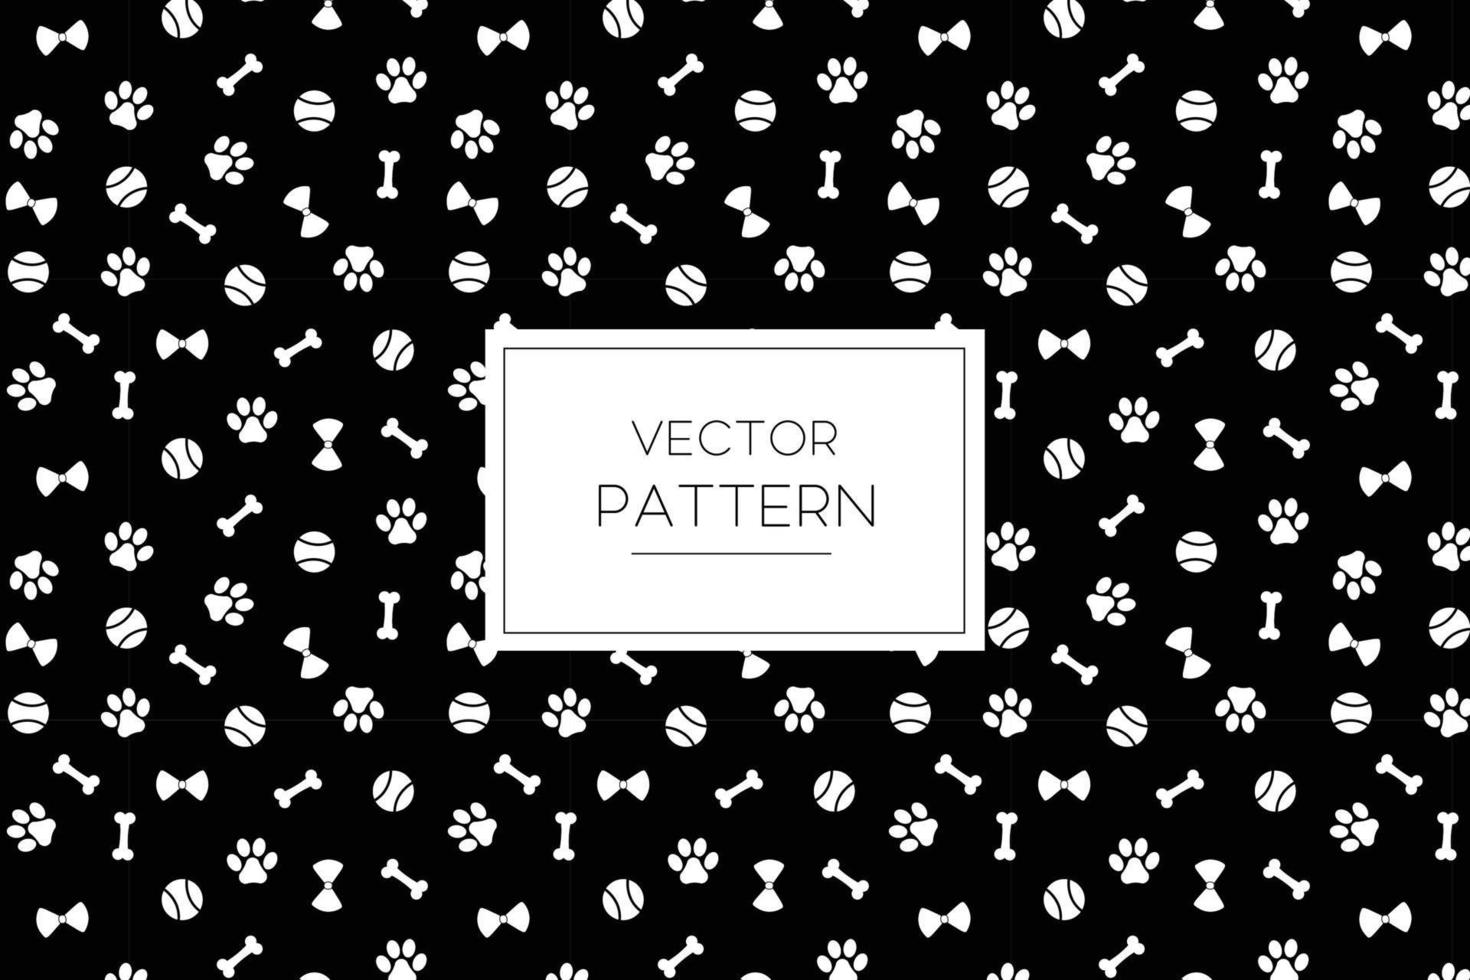 White footprint dog paw symbol seamless repeat pattern cute design on a black background vector